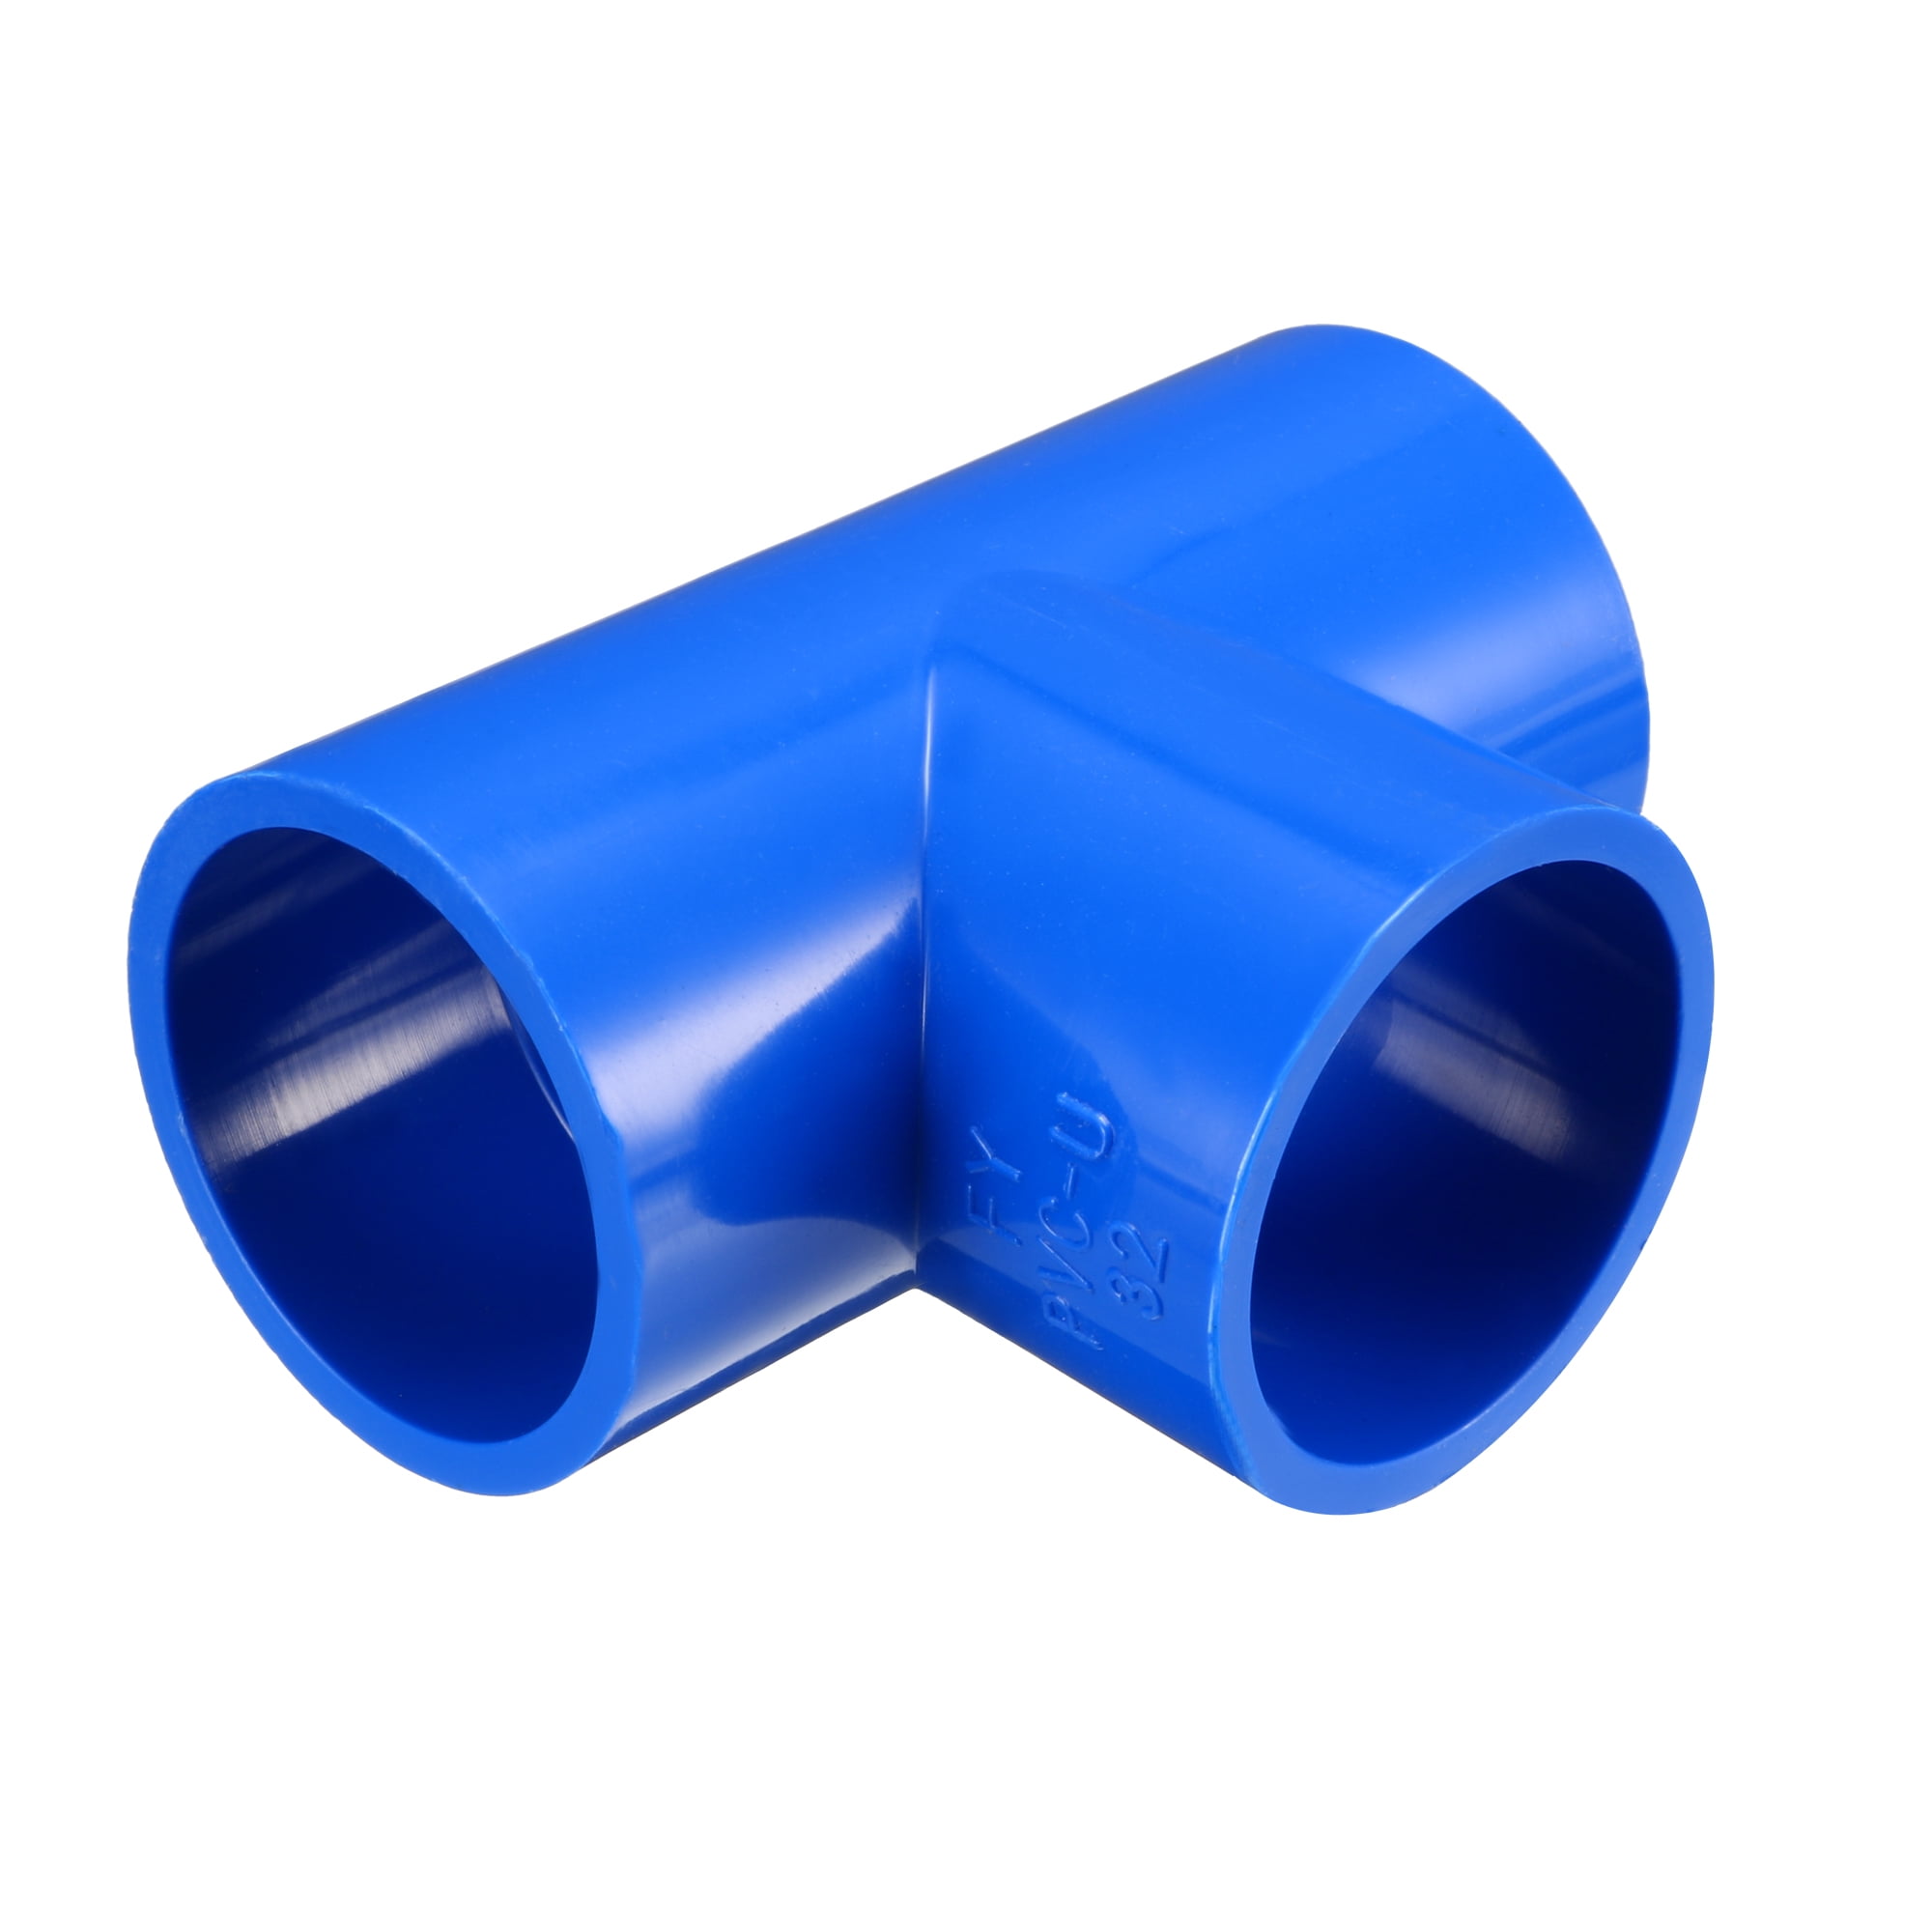 32mm Slip Tee PVC Pipe Fitting T-Shaped Coupling Connectors Blue 5 Pcs